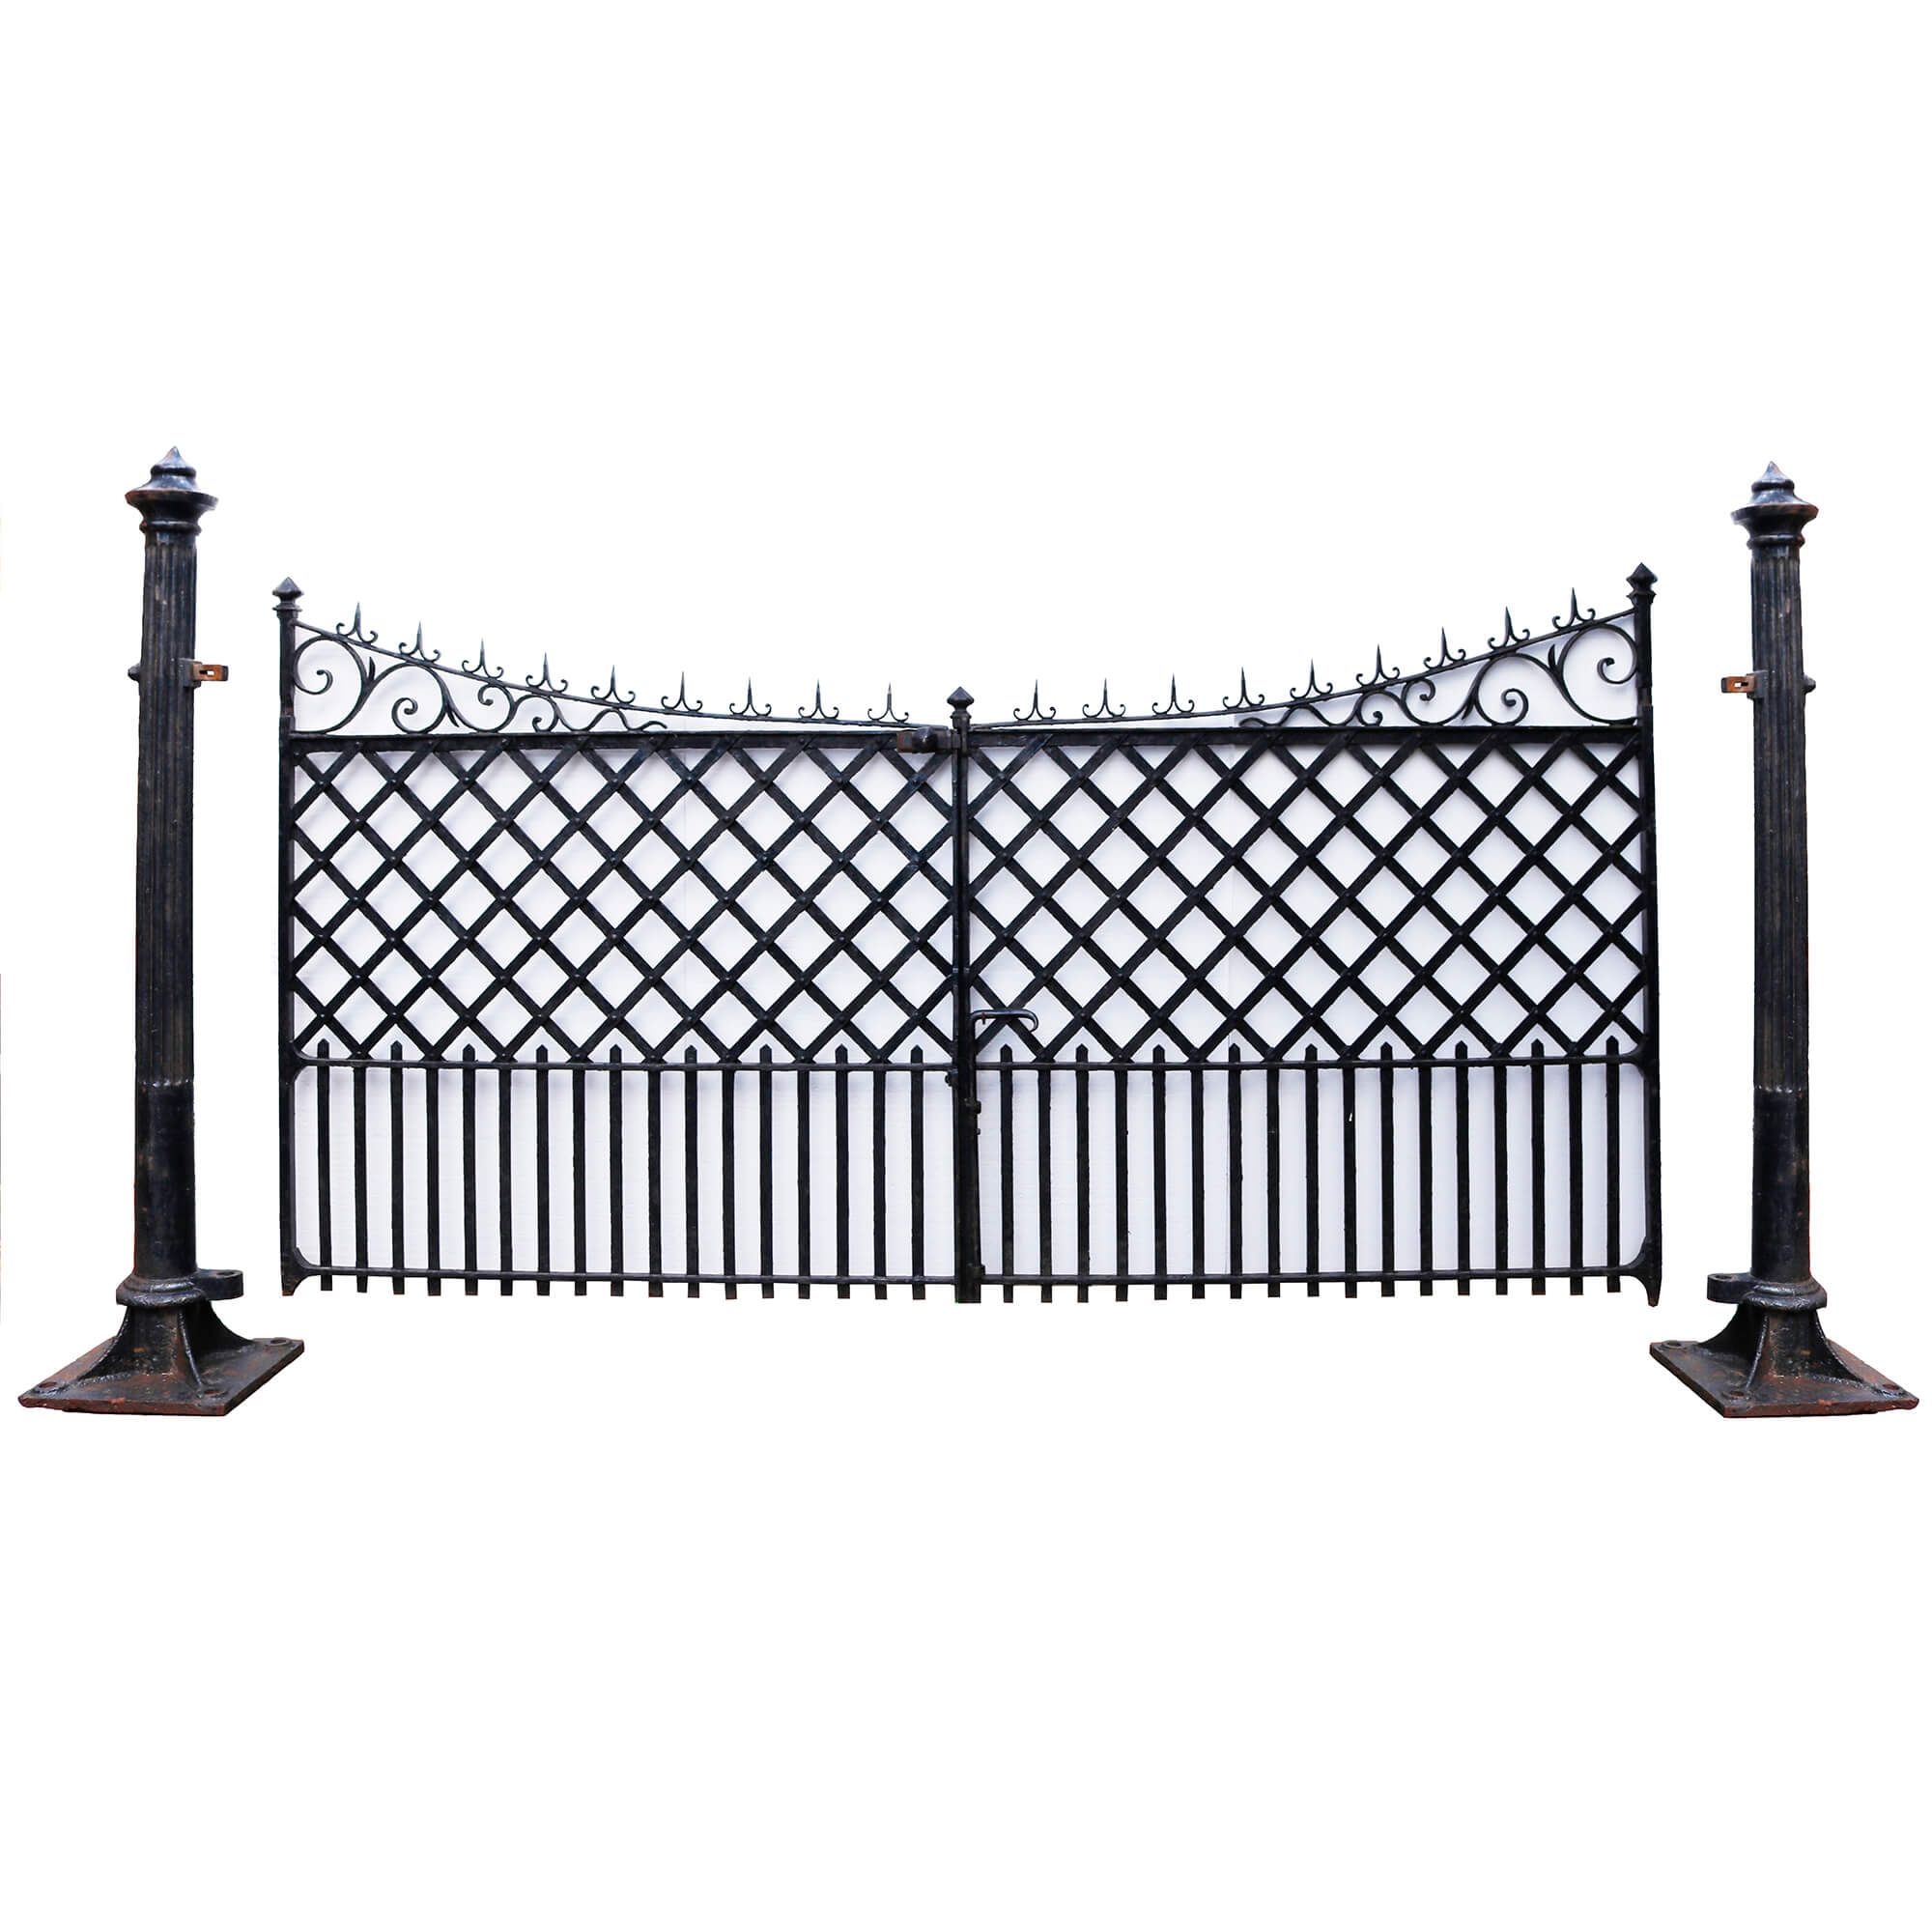 Set of Wrought Iron Driveway Gates and Posts 307 cm (10′)